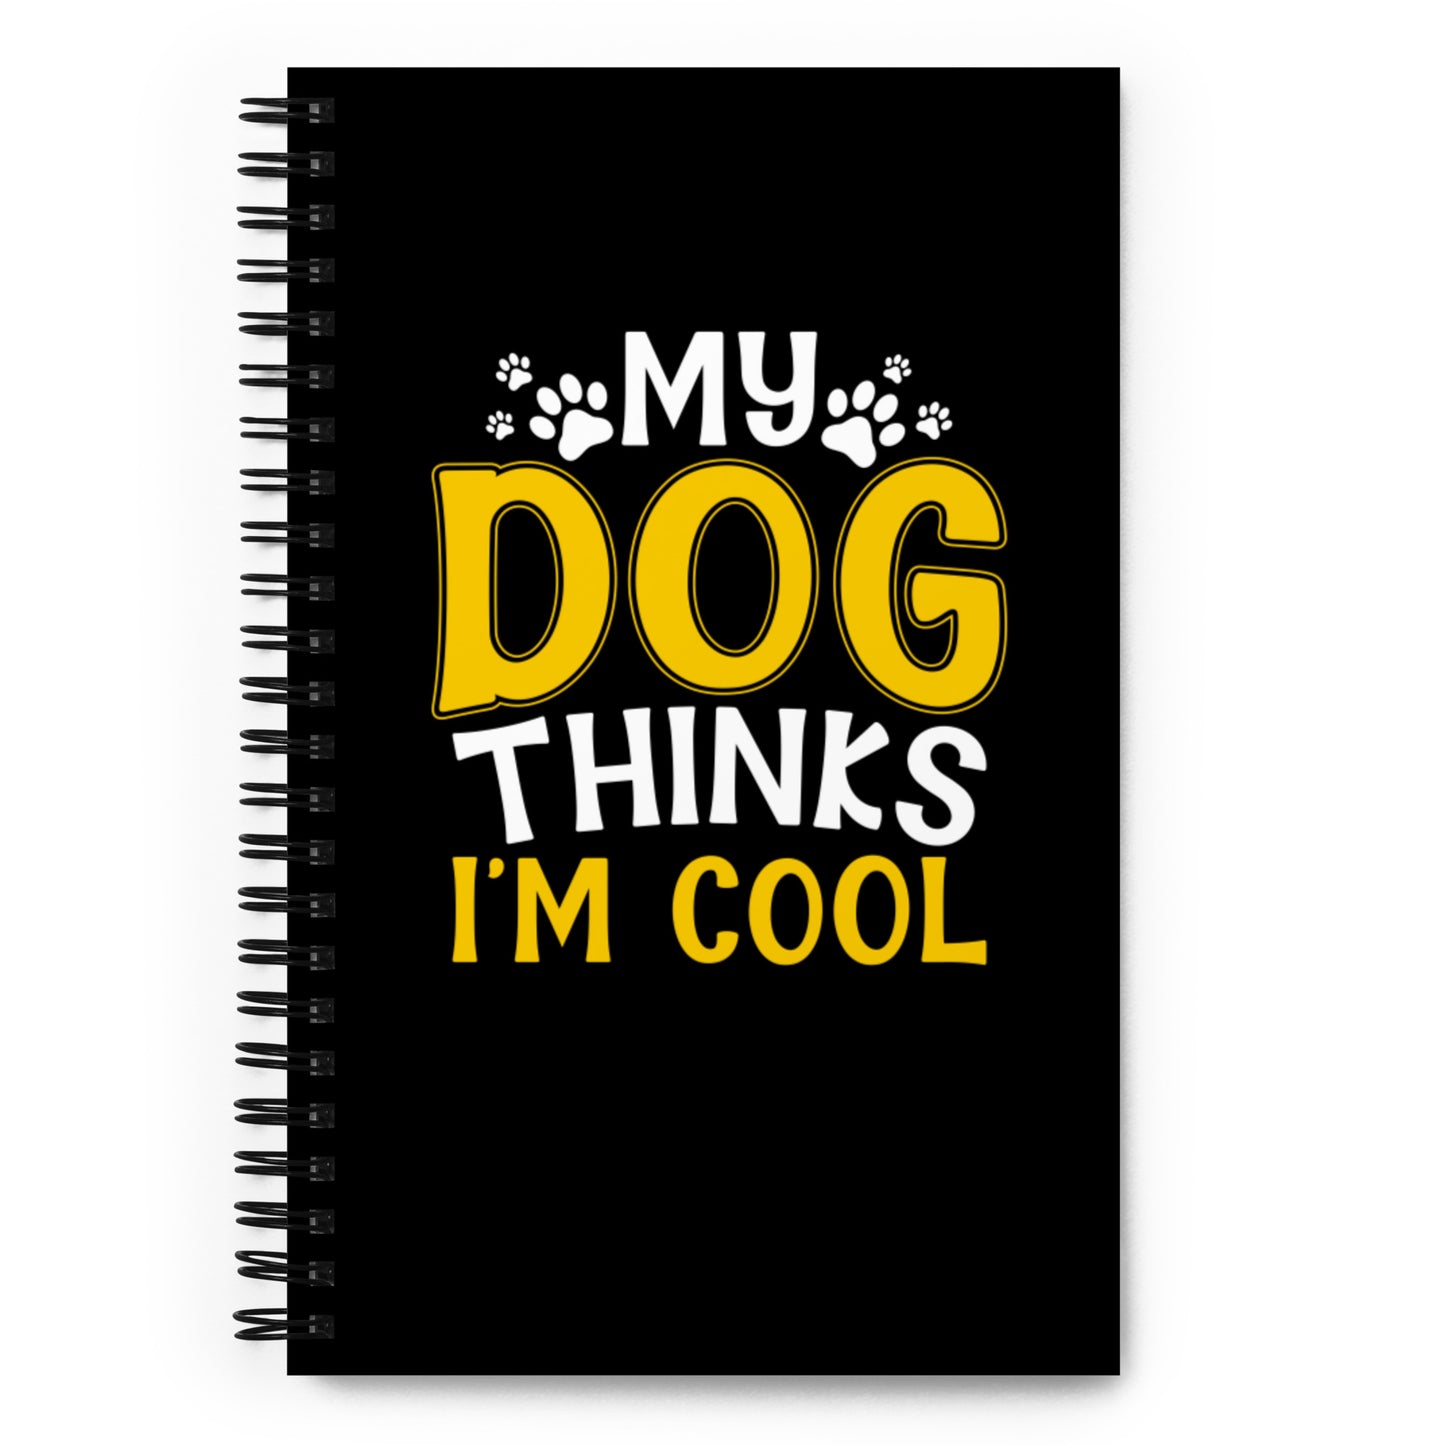 My Dog Thinks I'm Cool Spiral notebook